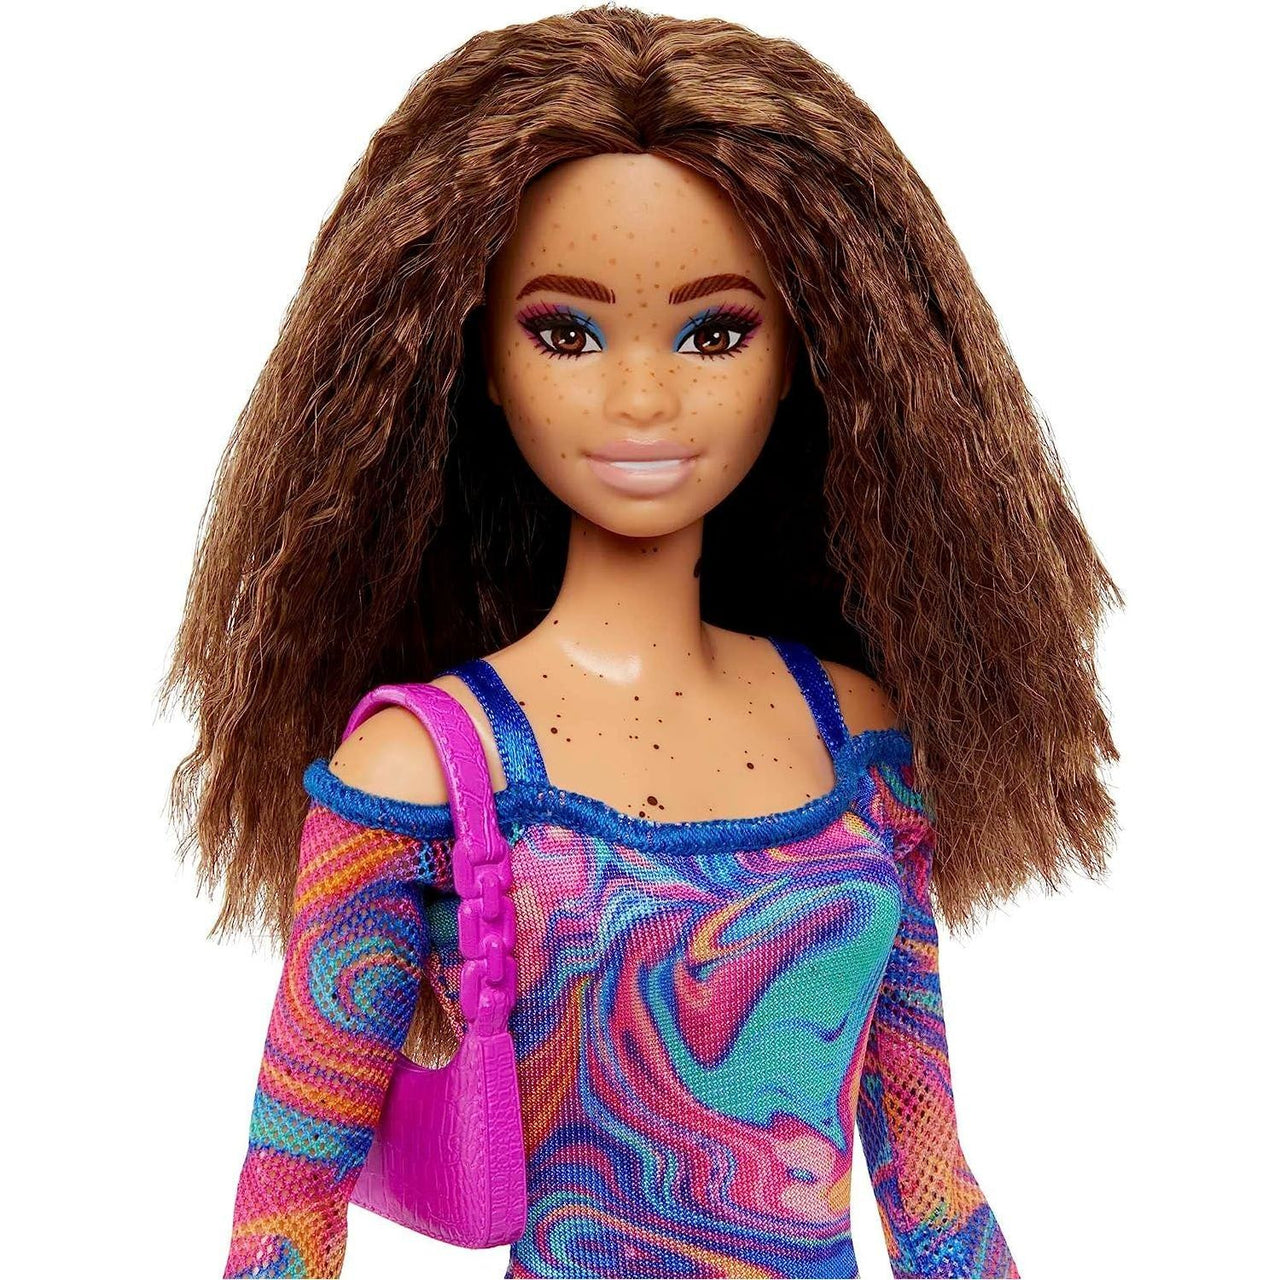 Barbie Fashionista Doll 206 - Crimped Hair and Moles/Freckles Barbie